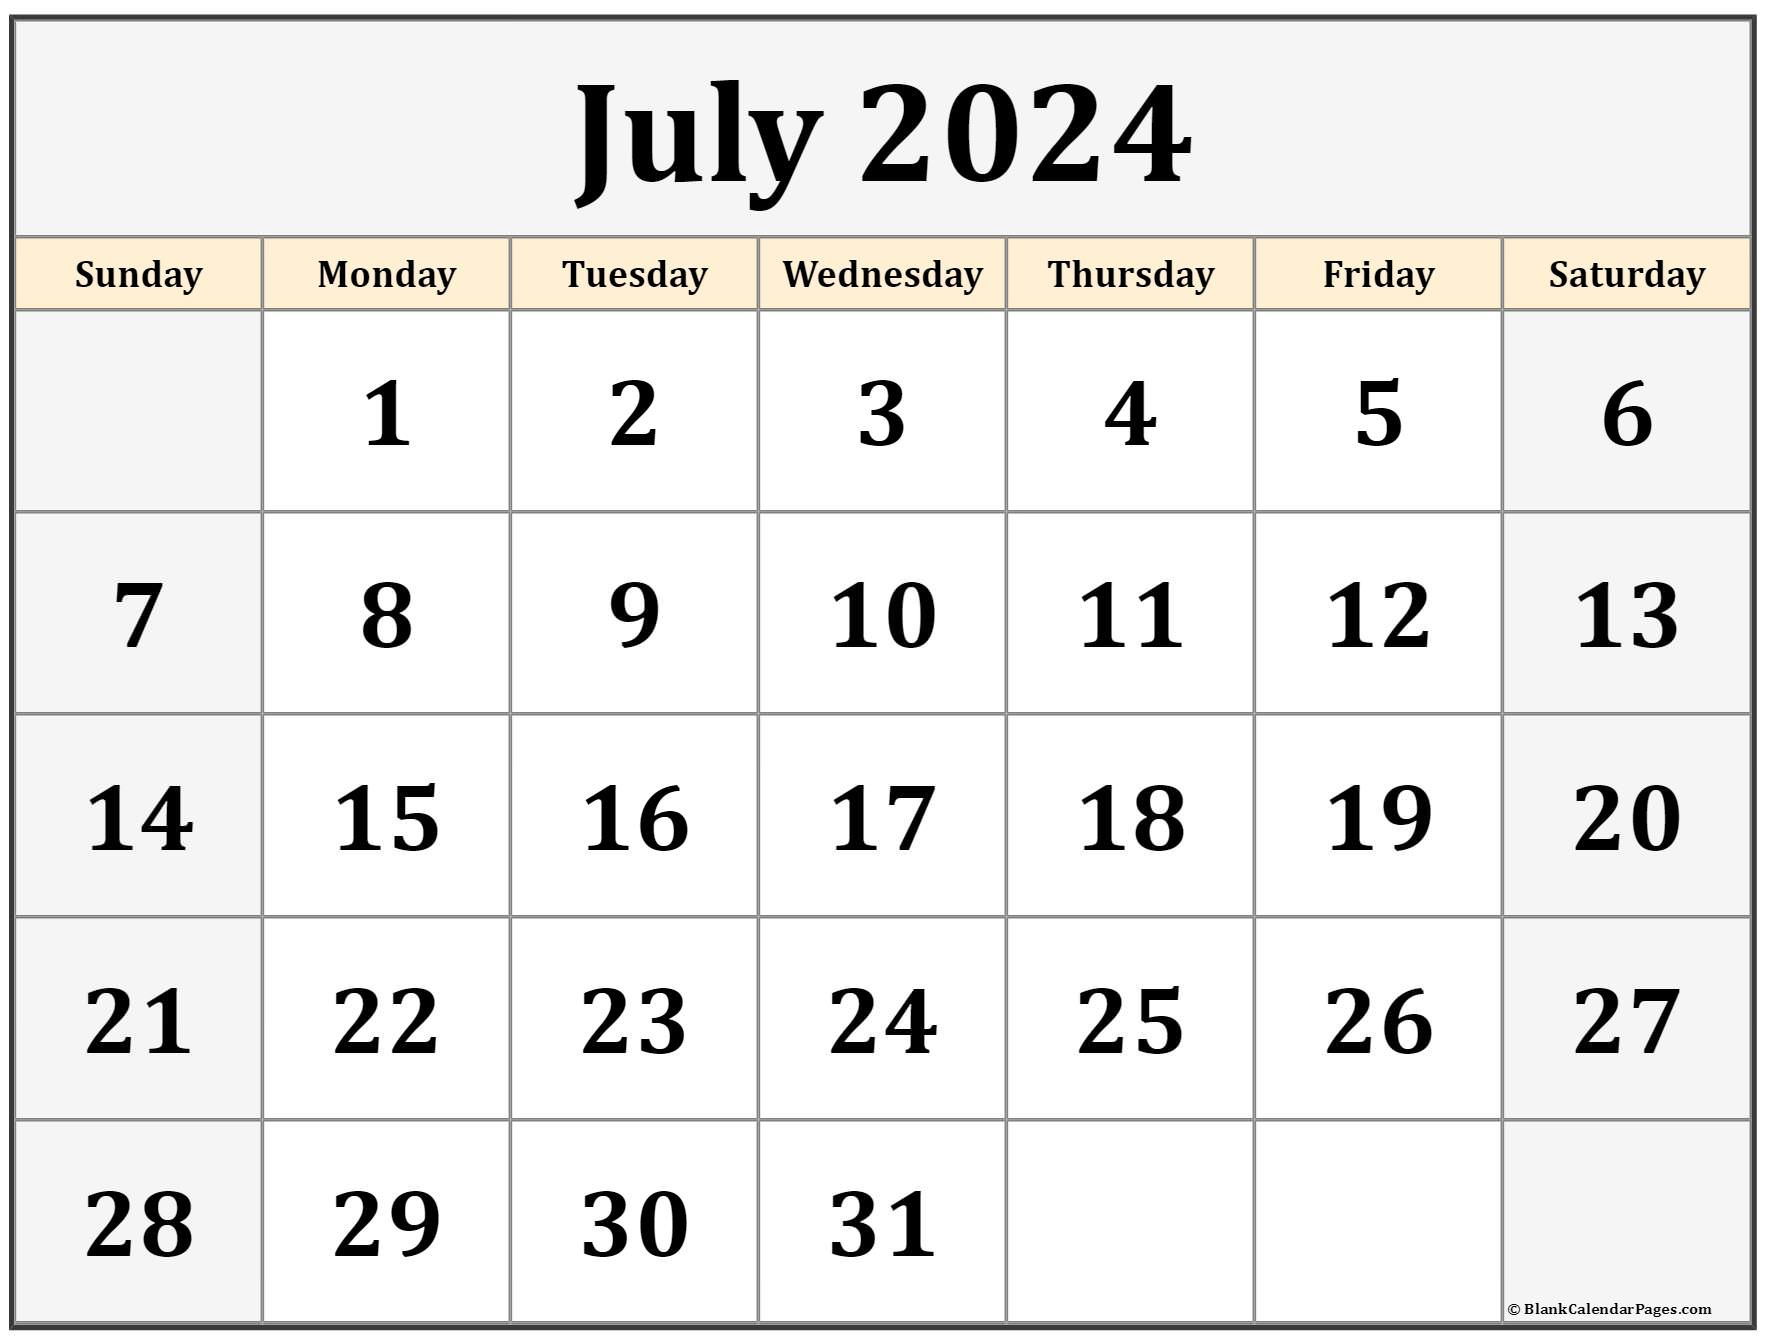 July 2024 Calendar | Free Printable Calendar within Calendar Page For July 2024